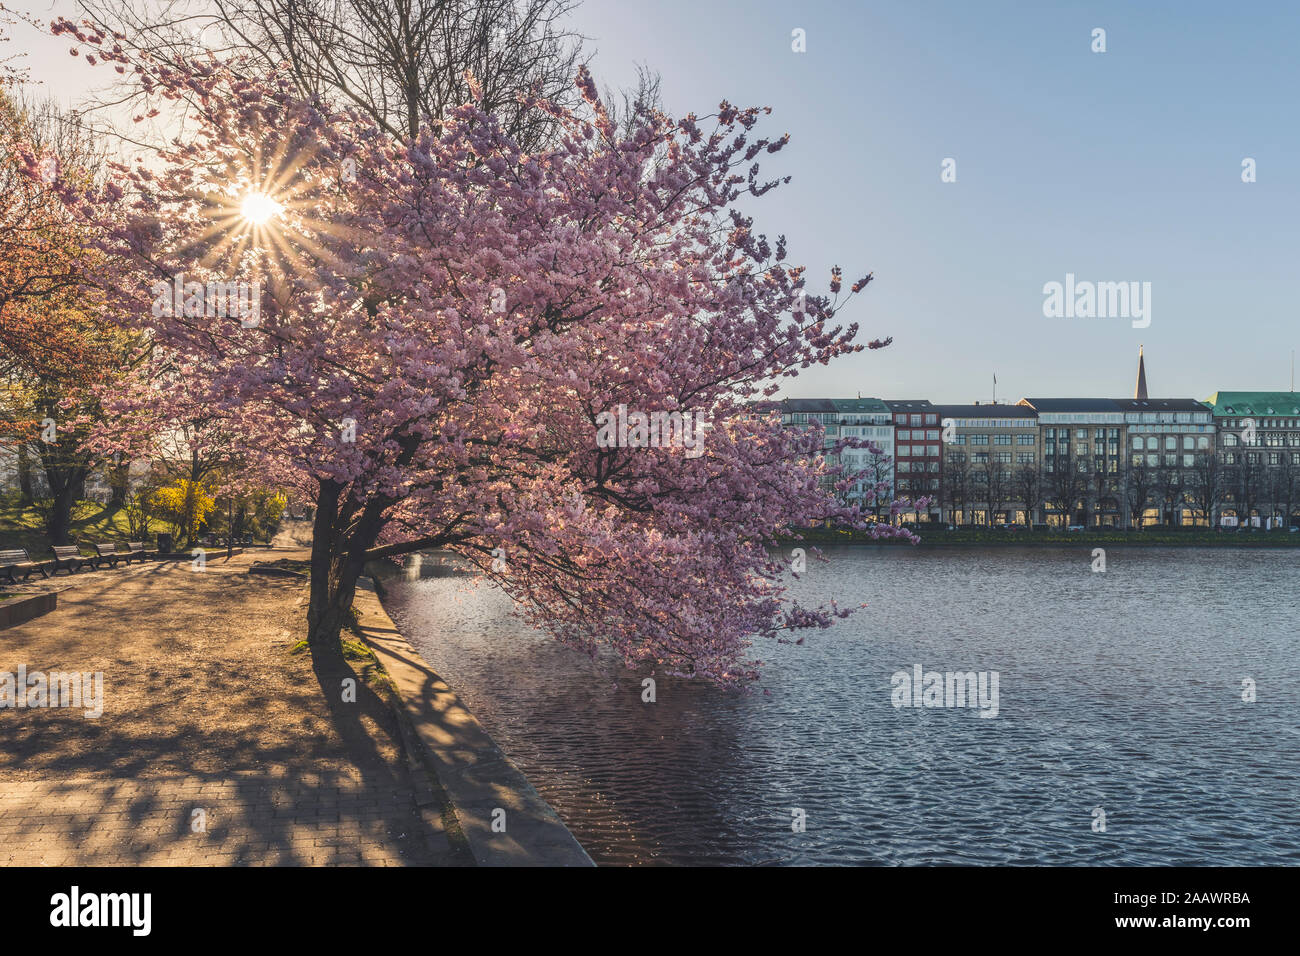 Cherry trees by Binnenalster lake against sky in Hamburg during springtime, Germany Stock Photo